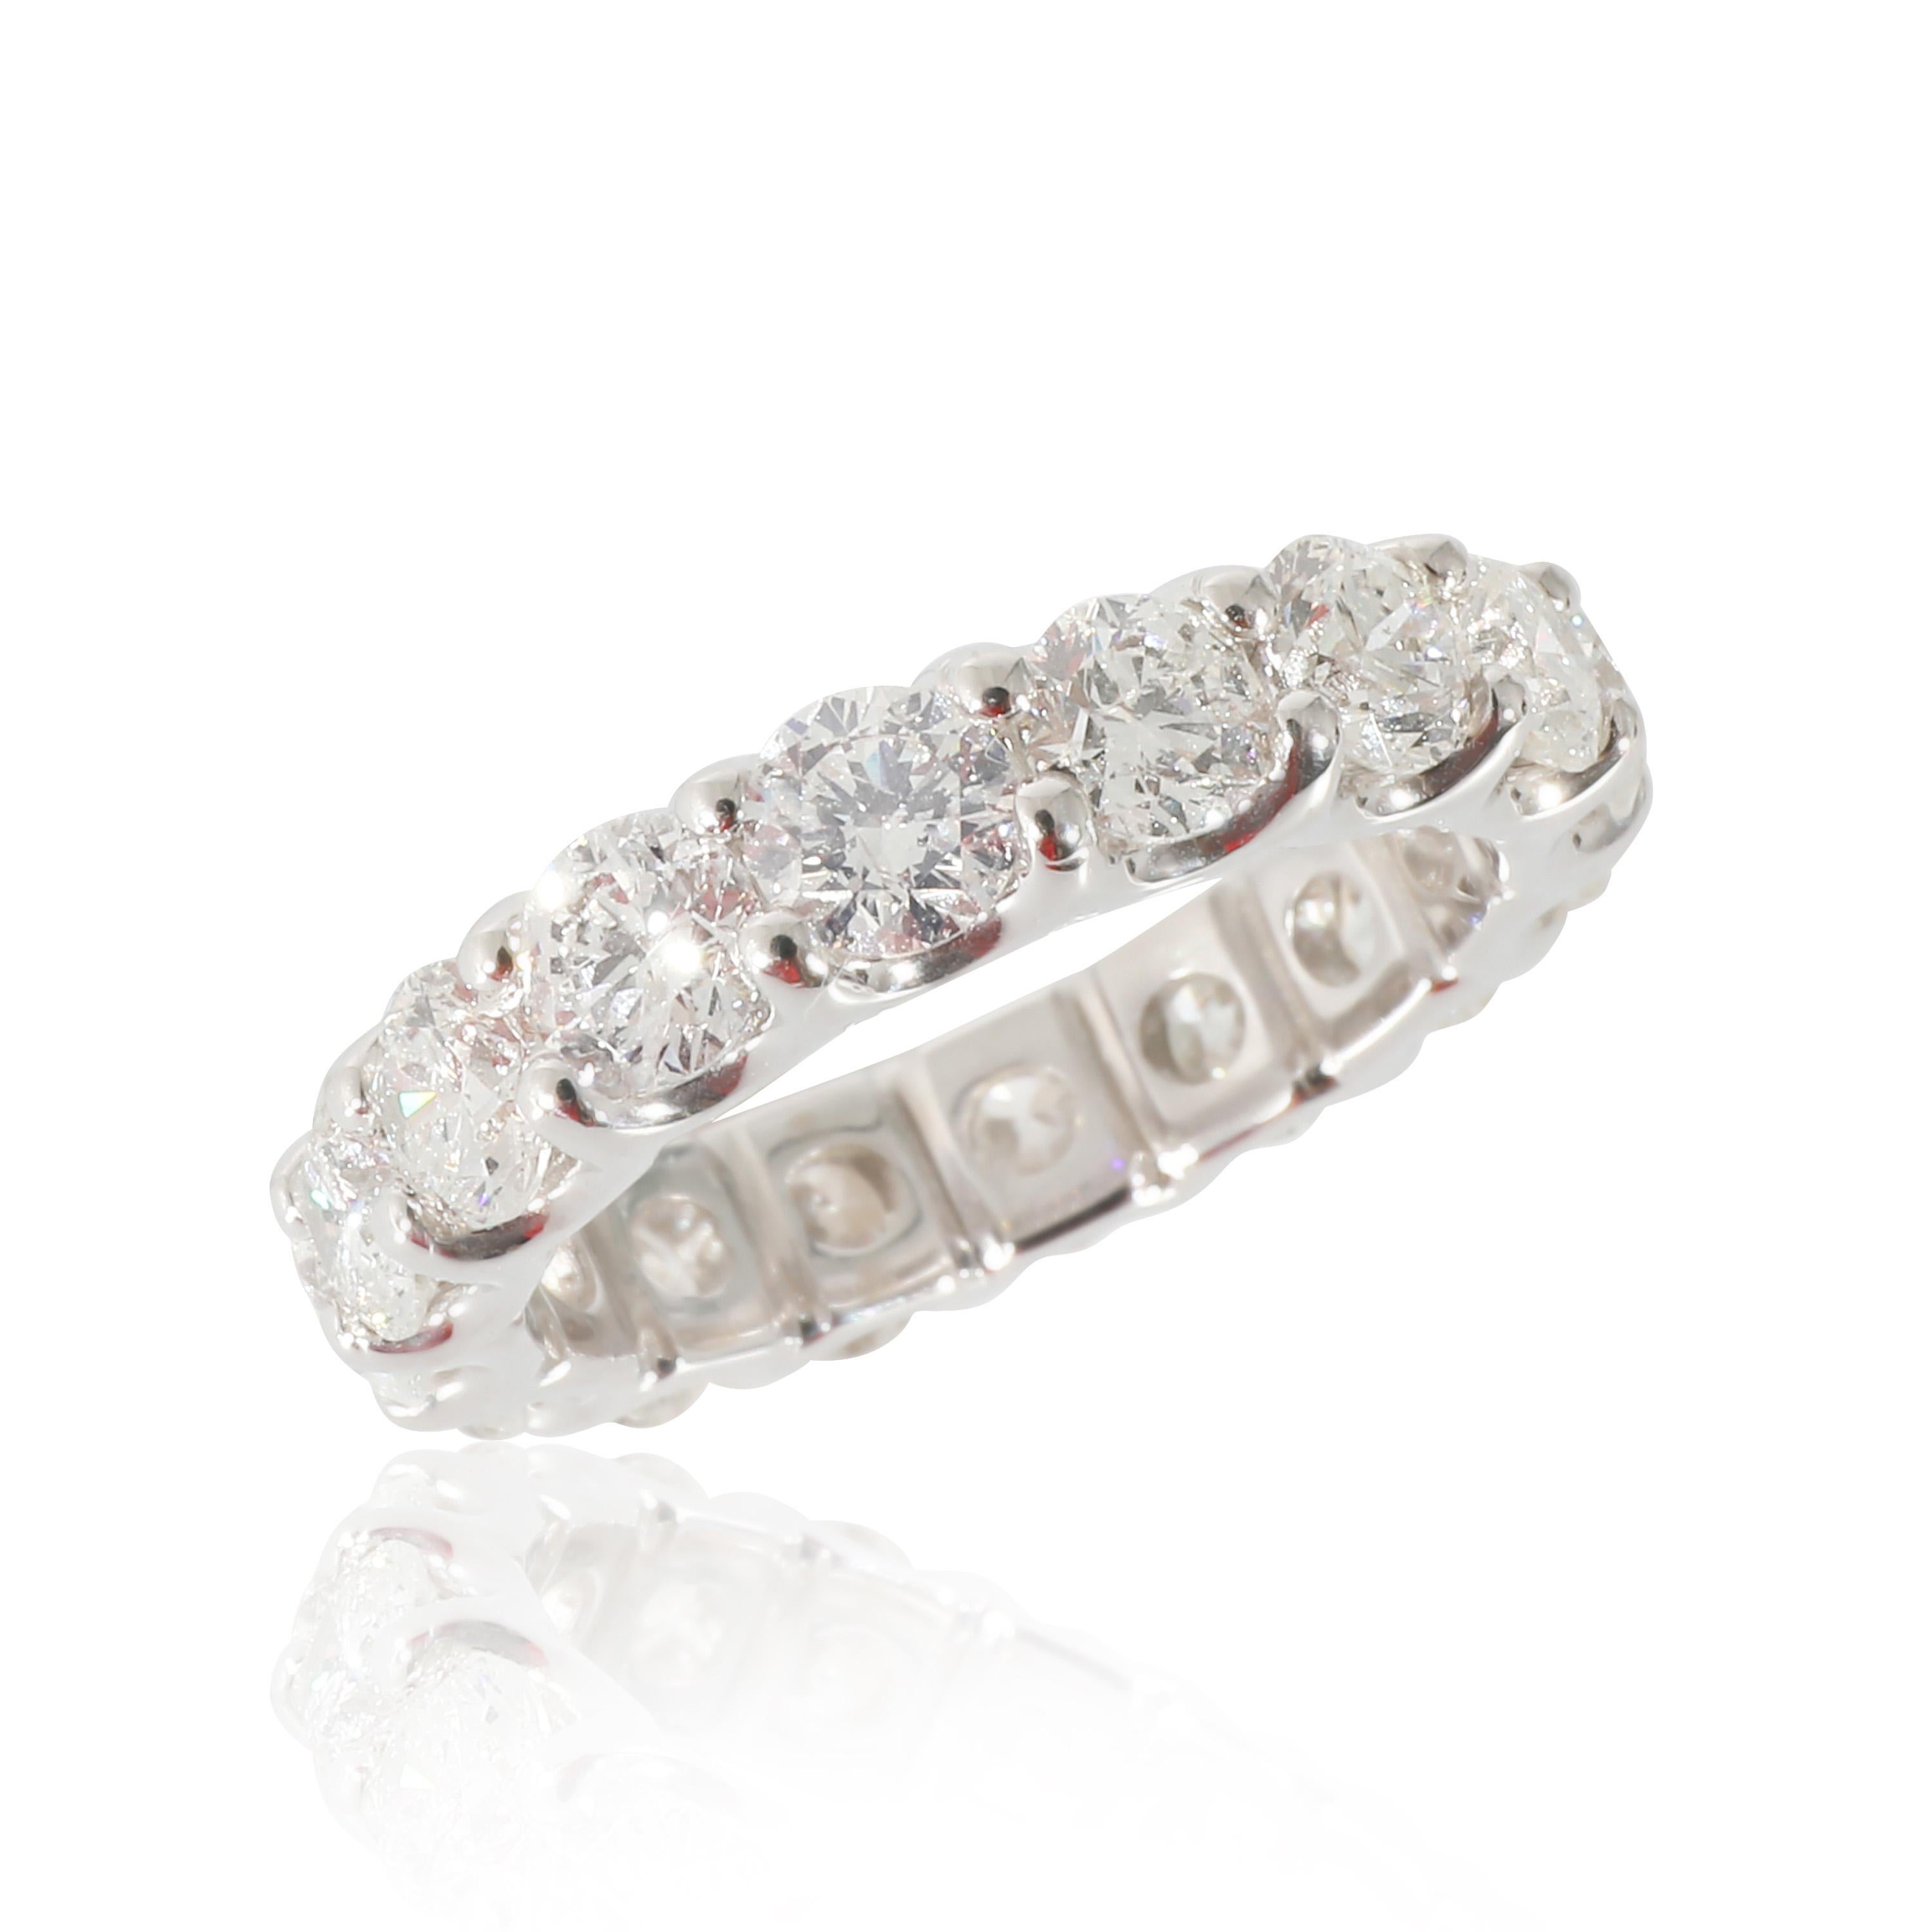 Diamond Eternity Ring in 14K White Gold (4.01 CTW)

PRIMARY DETAILS
SKU: Z133544
Listing Title: Diamond Eternity Ring in 14K White Gold (4.01 CTW)
Condition Description: New and unworn. Ring size is 6.
Metal Type: White Gold
Metal Purity: 14K
Ring